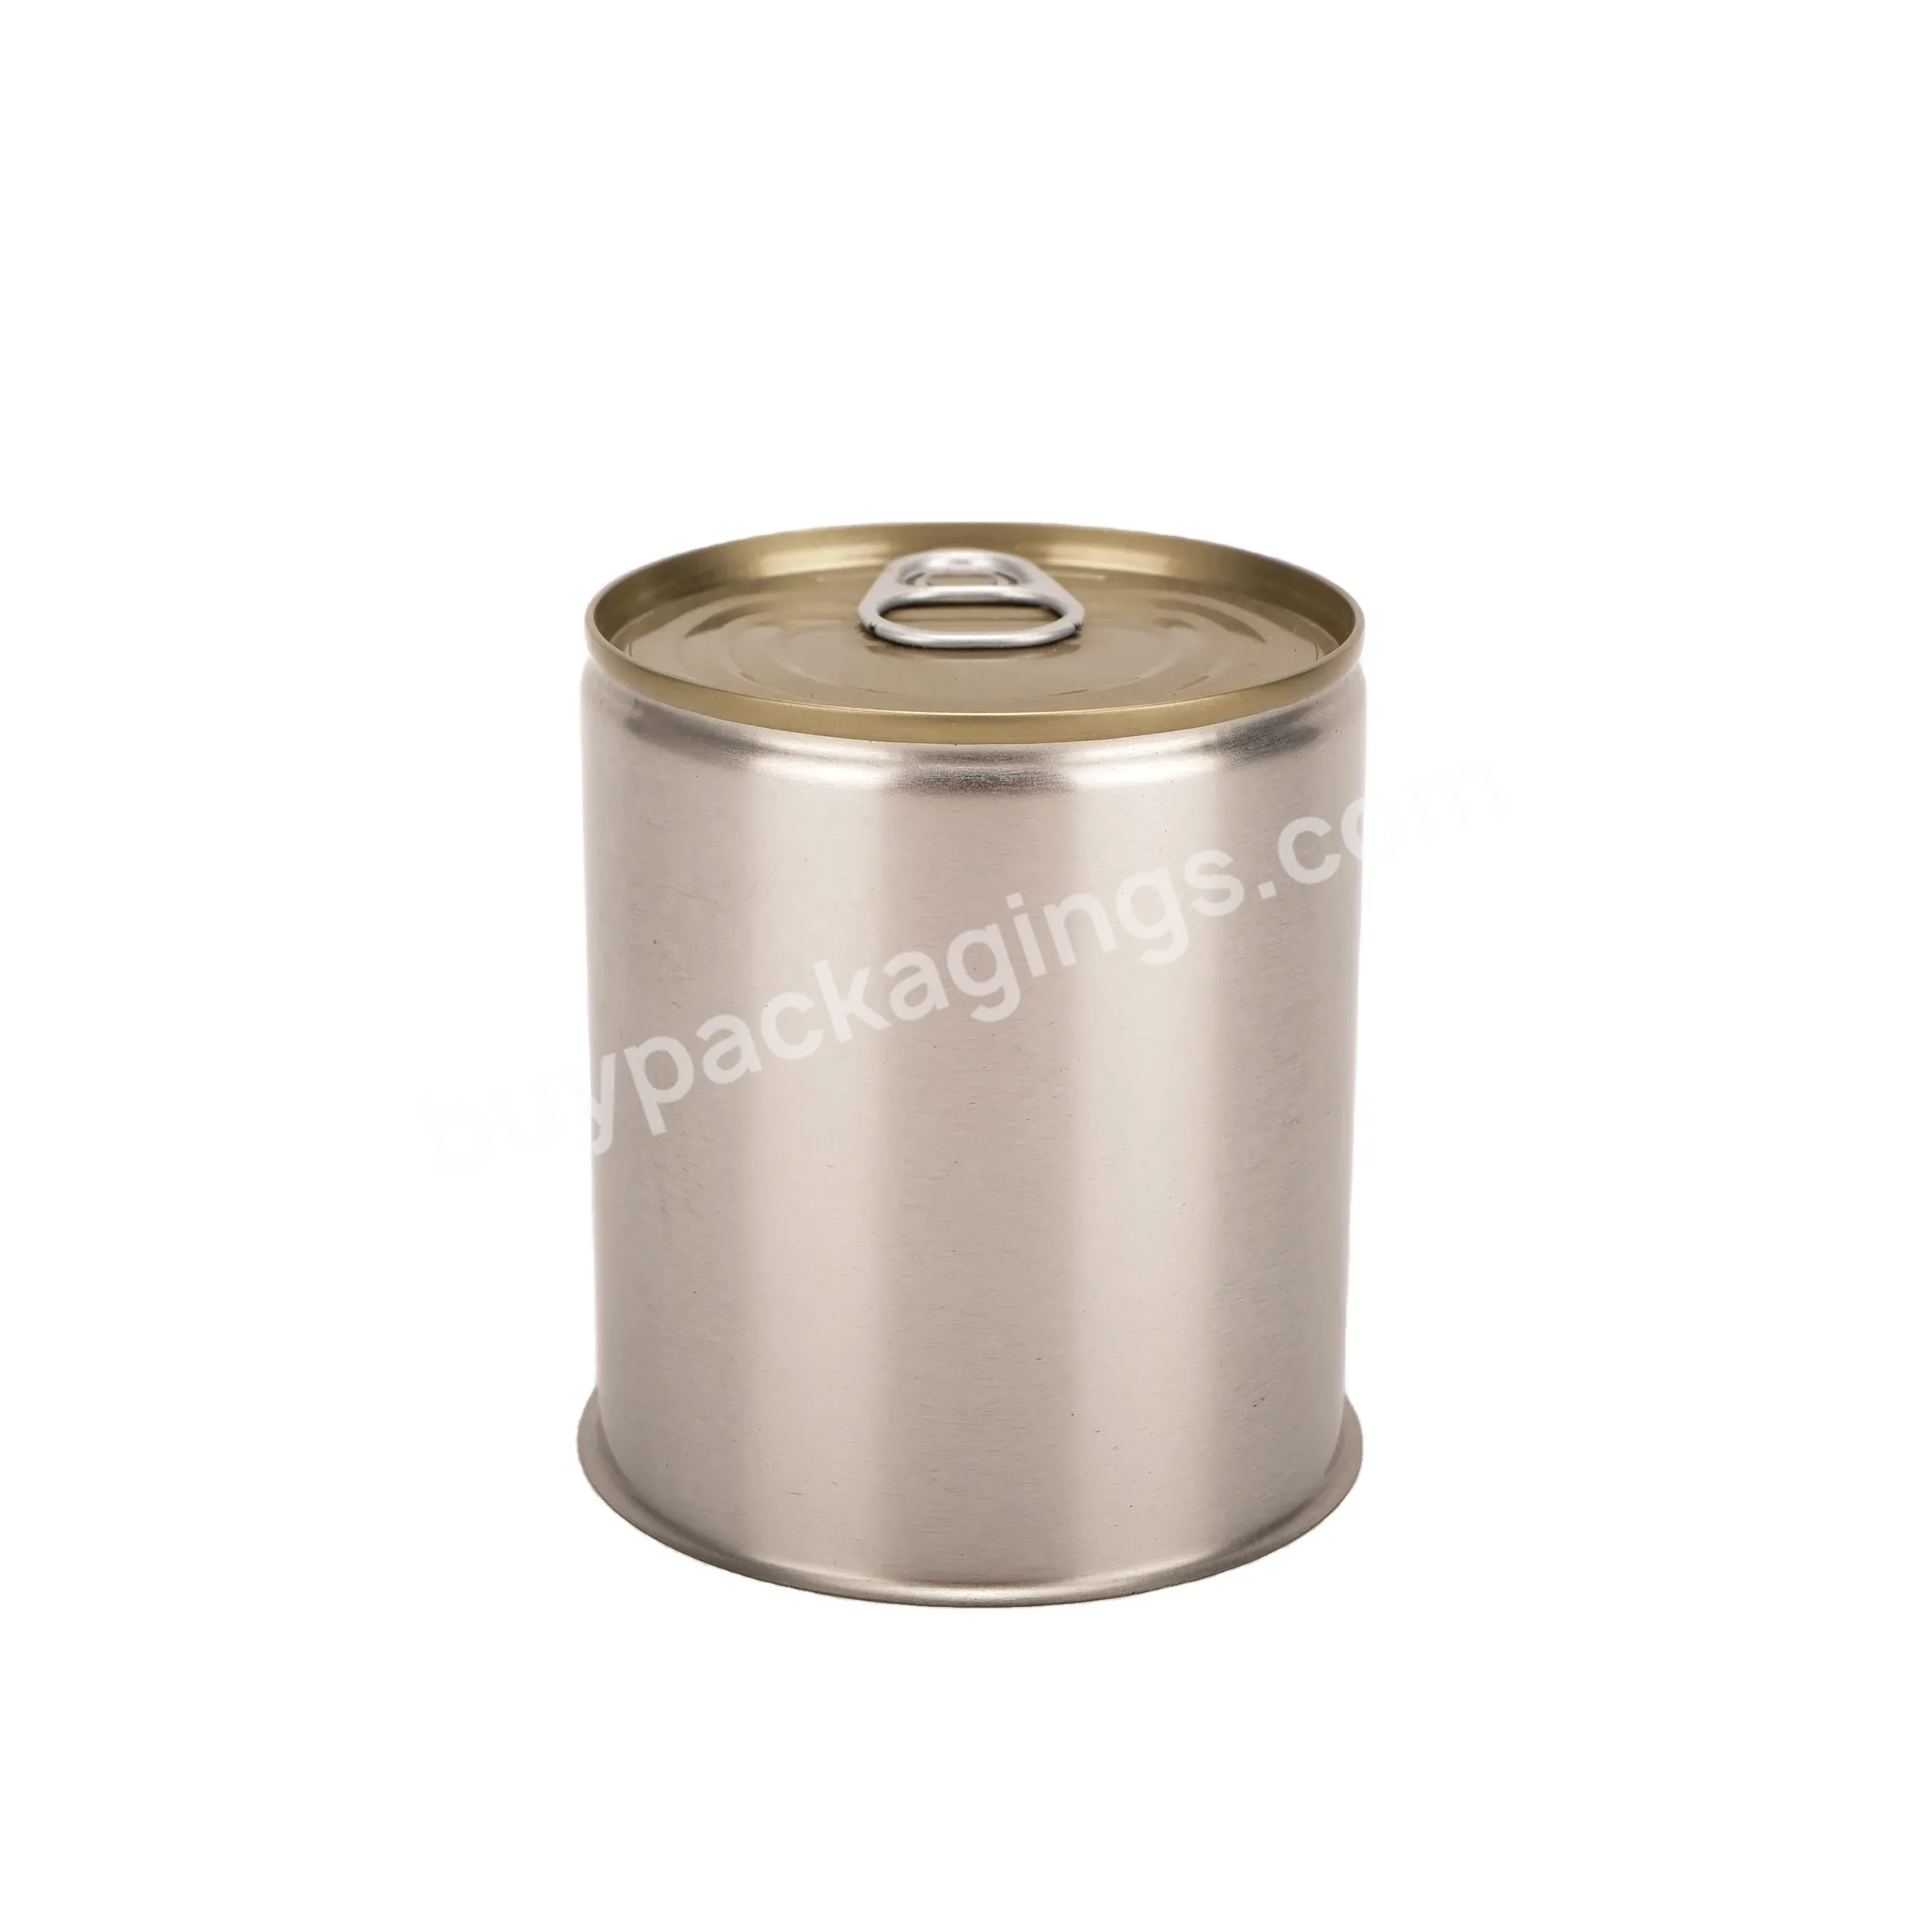 Wholesale 783# Empty Easy Open Metal Packaging Tin Can For Corned Beef Canning - Buy Tin Cans Wholesale,Tin Cans For Food Packaging,Tin Cans For Corned Beef.